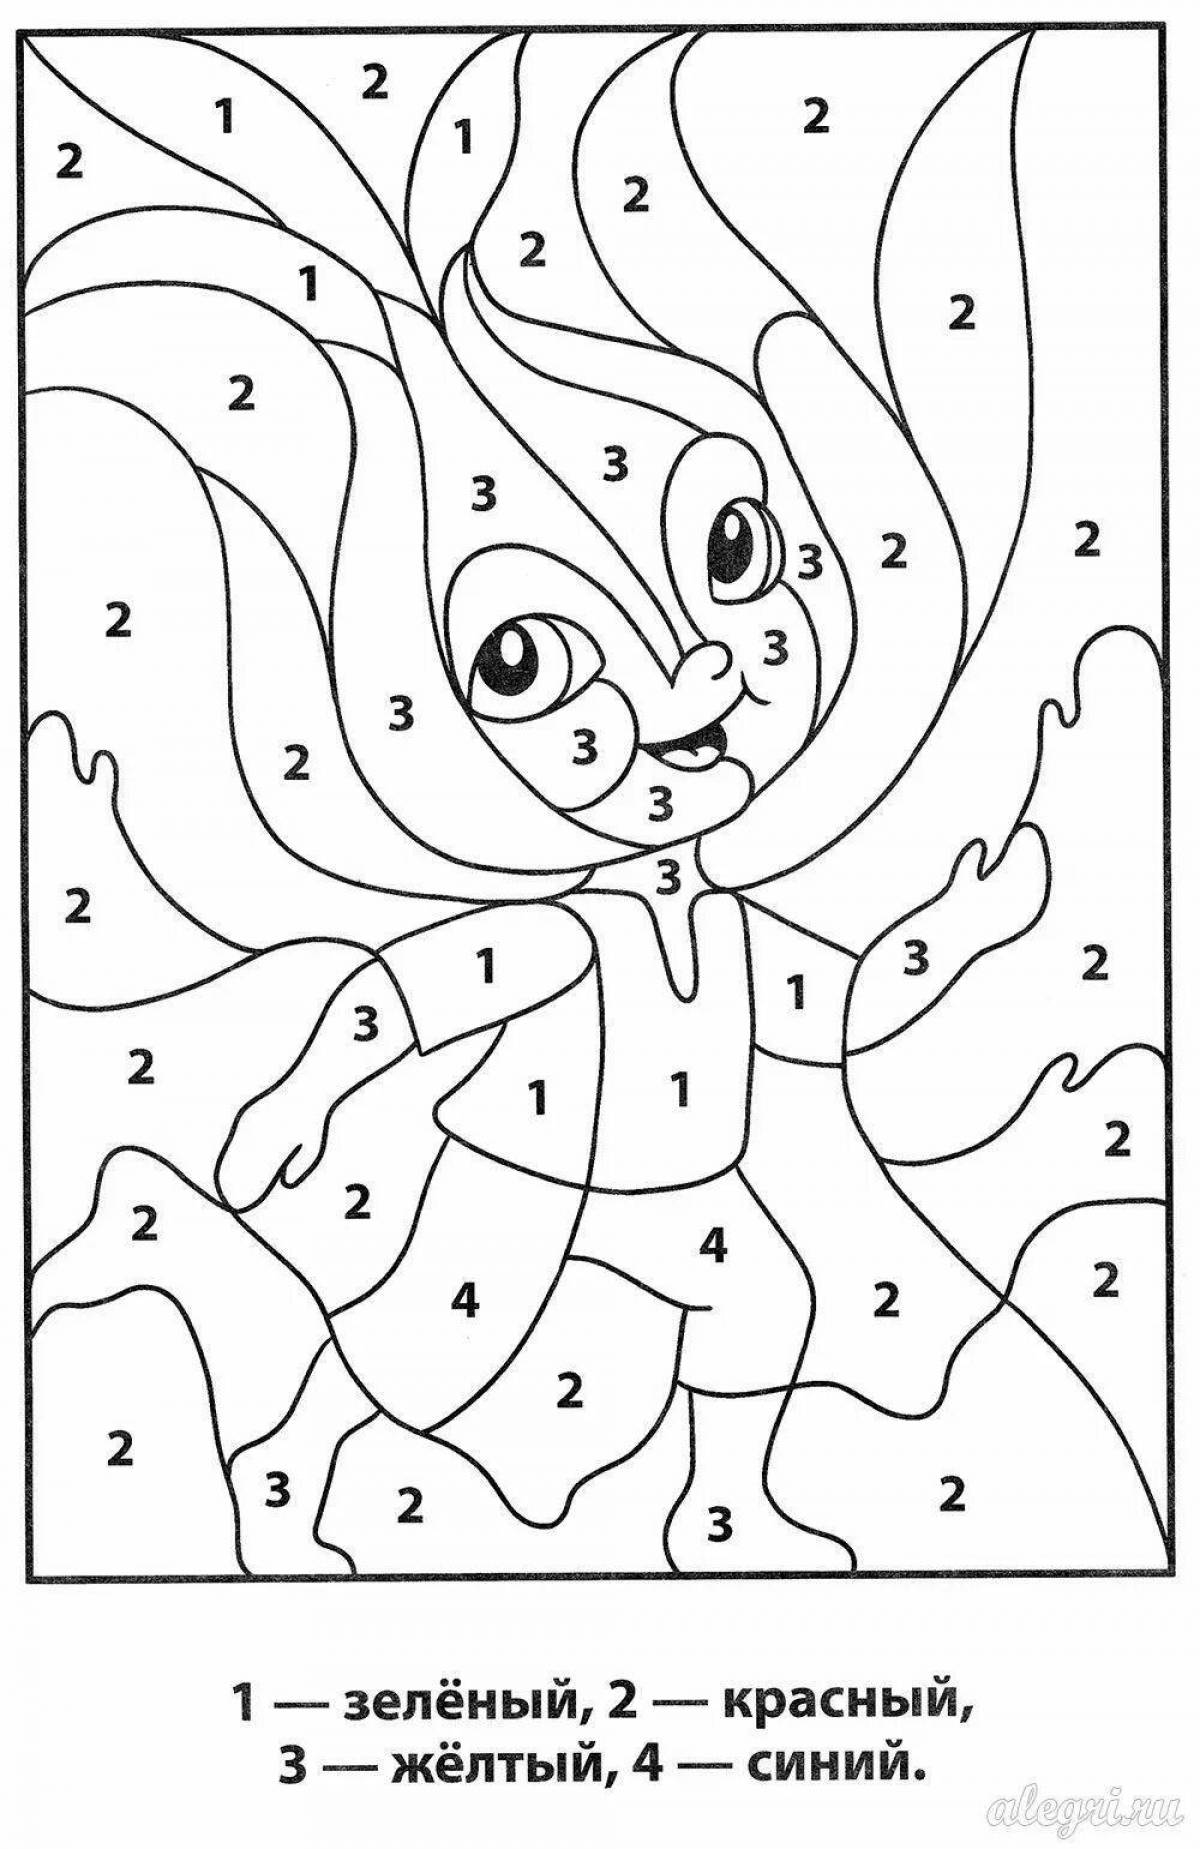 Fun coloring by numbers for kids 5-6 years old